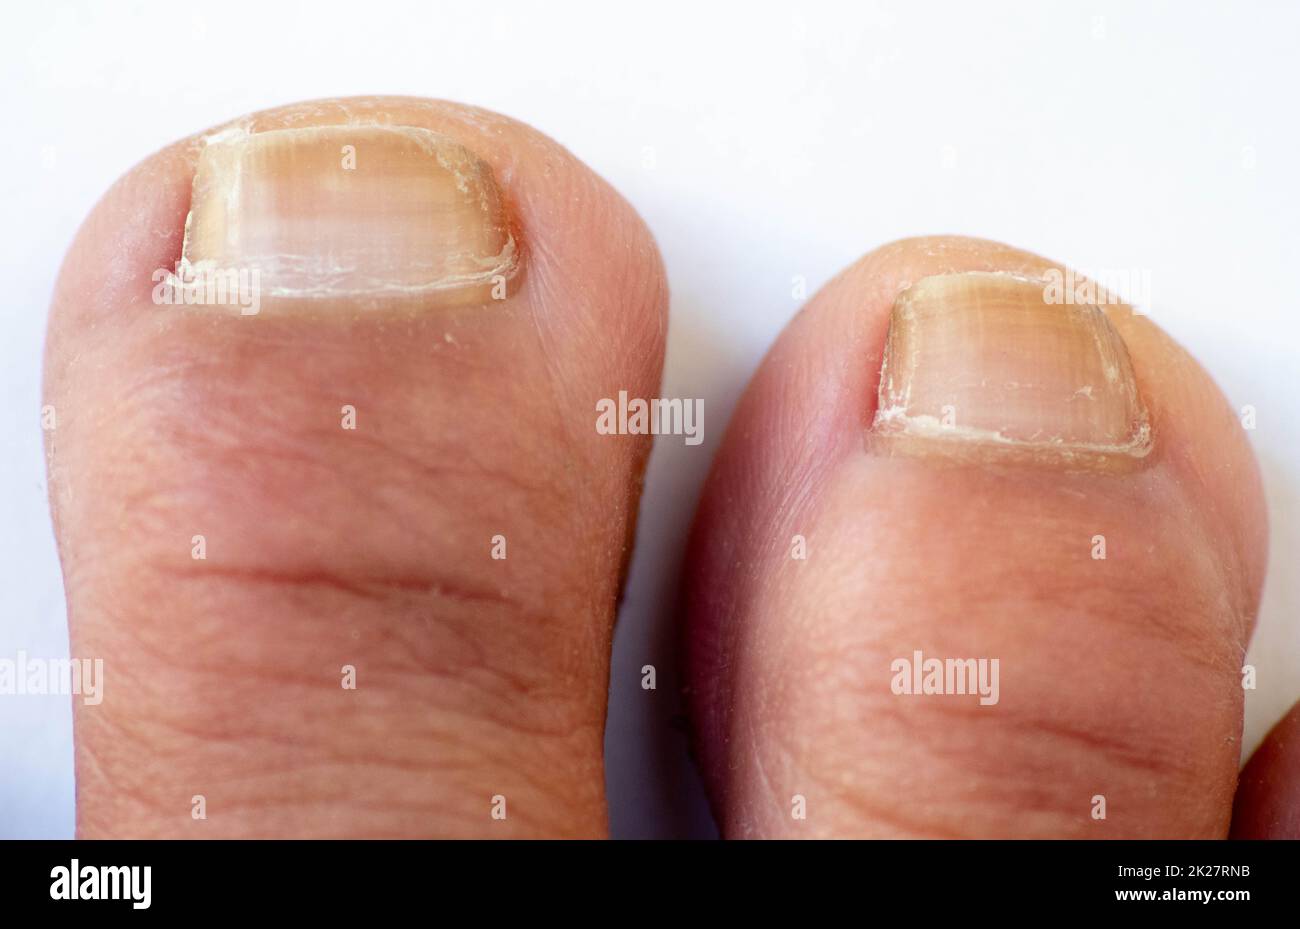 Toes, hands and nails. Male human body parts 20 to 30 years old Stock Photo